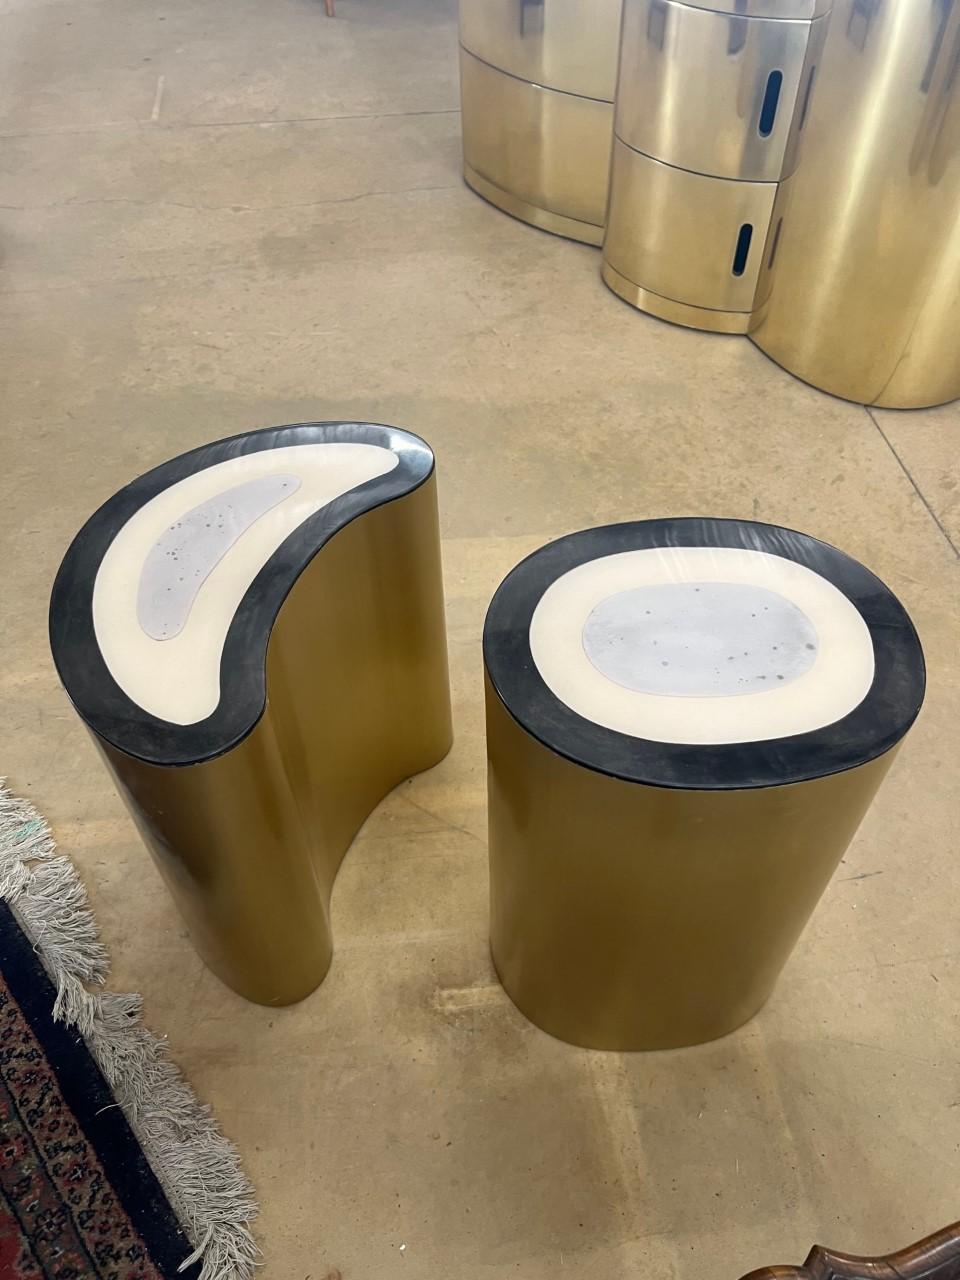 Set of two sculptural brass and parchment side tables with resin finish.

Color: 3 Tones: Brown, Natural, Tan Polished

Finish: Resin-Glazed, Crystal Coated


Dimensions of each side table :

#1 : W13.5? X D 11.5? X H 21?
#2 : W18.25? X D